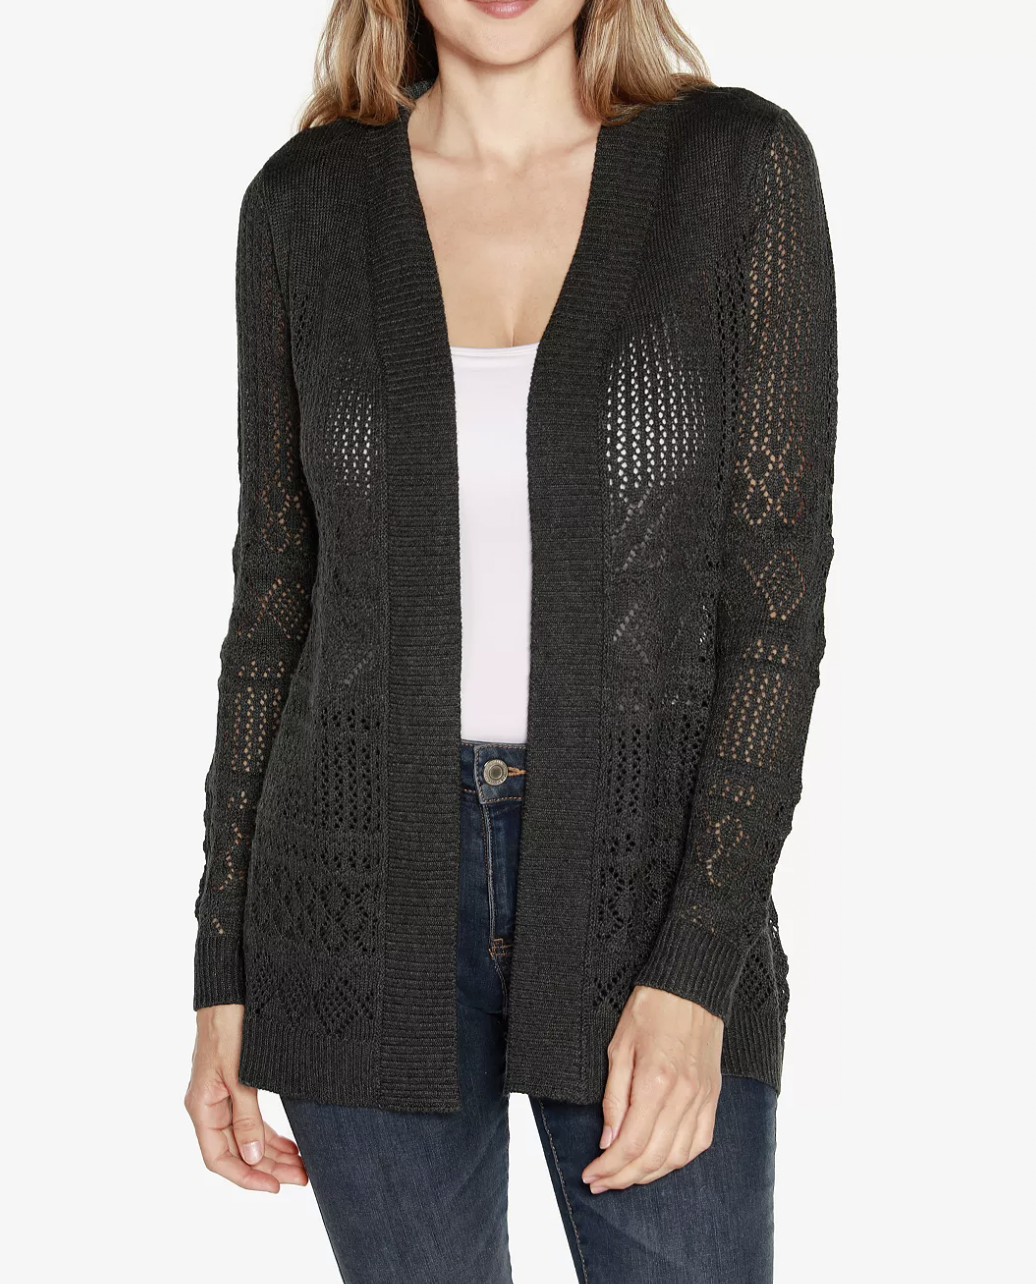 BELLDINI Pointelle Long Sleeves Open Cardigan Sweater